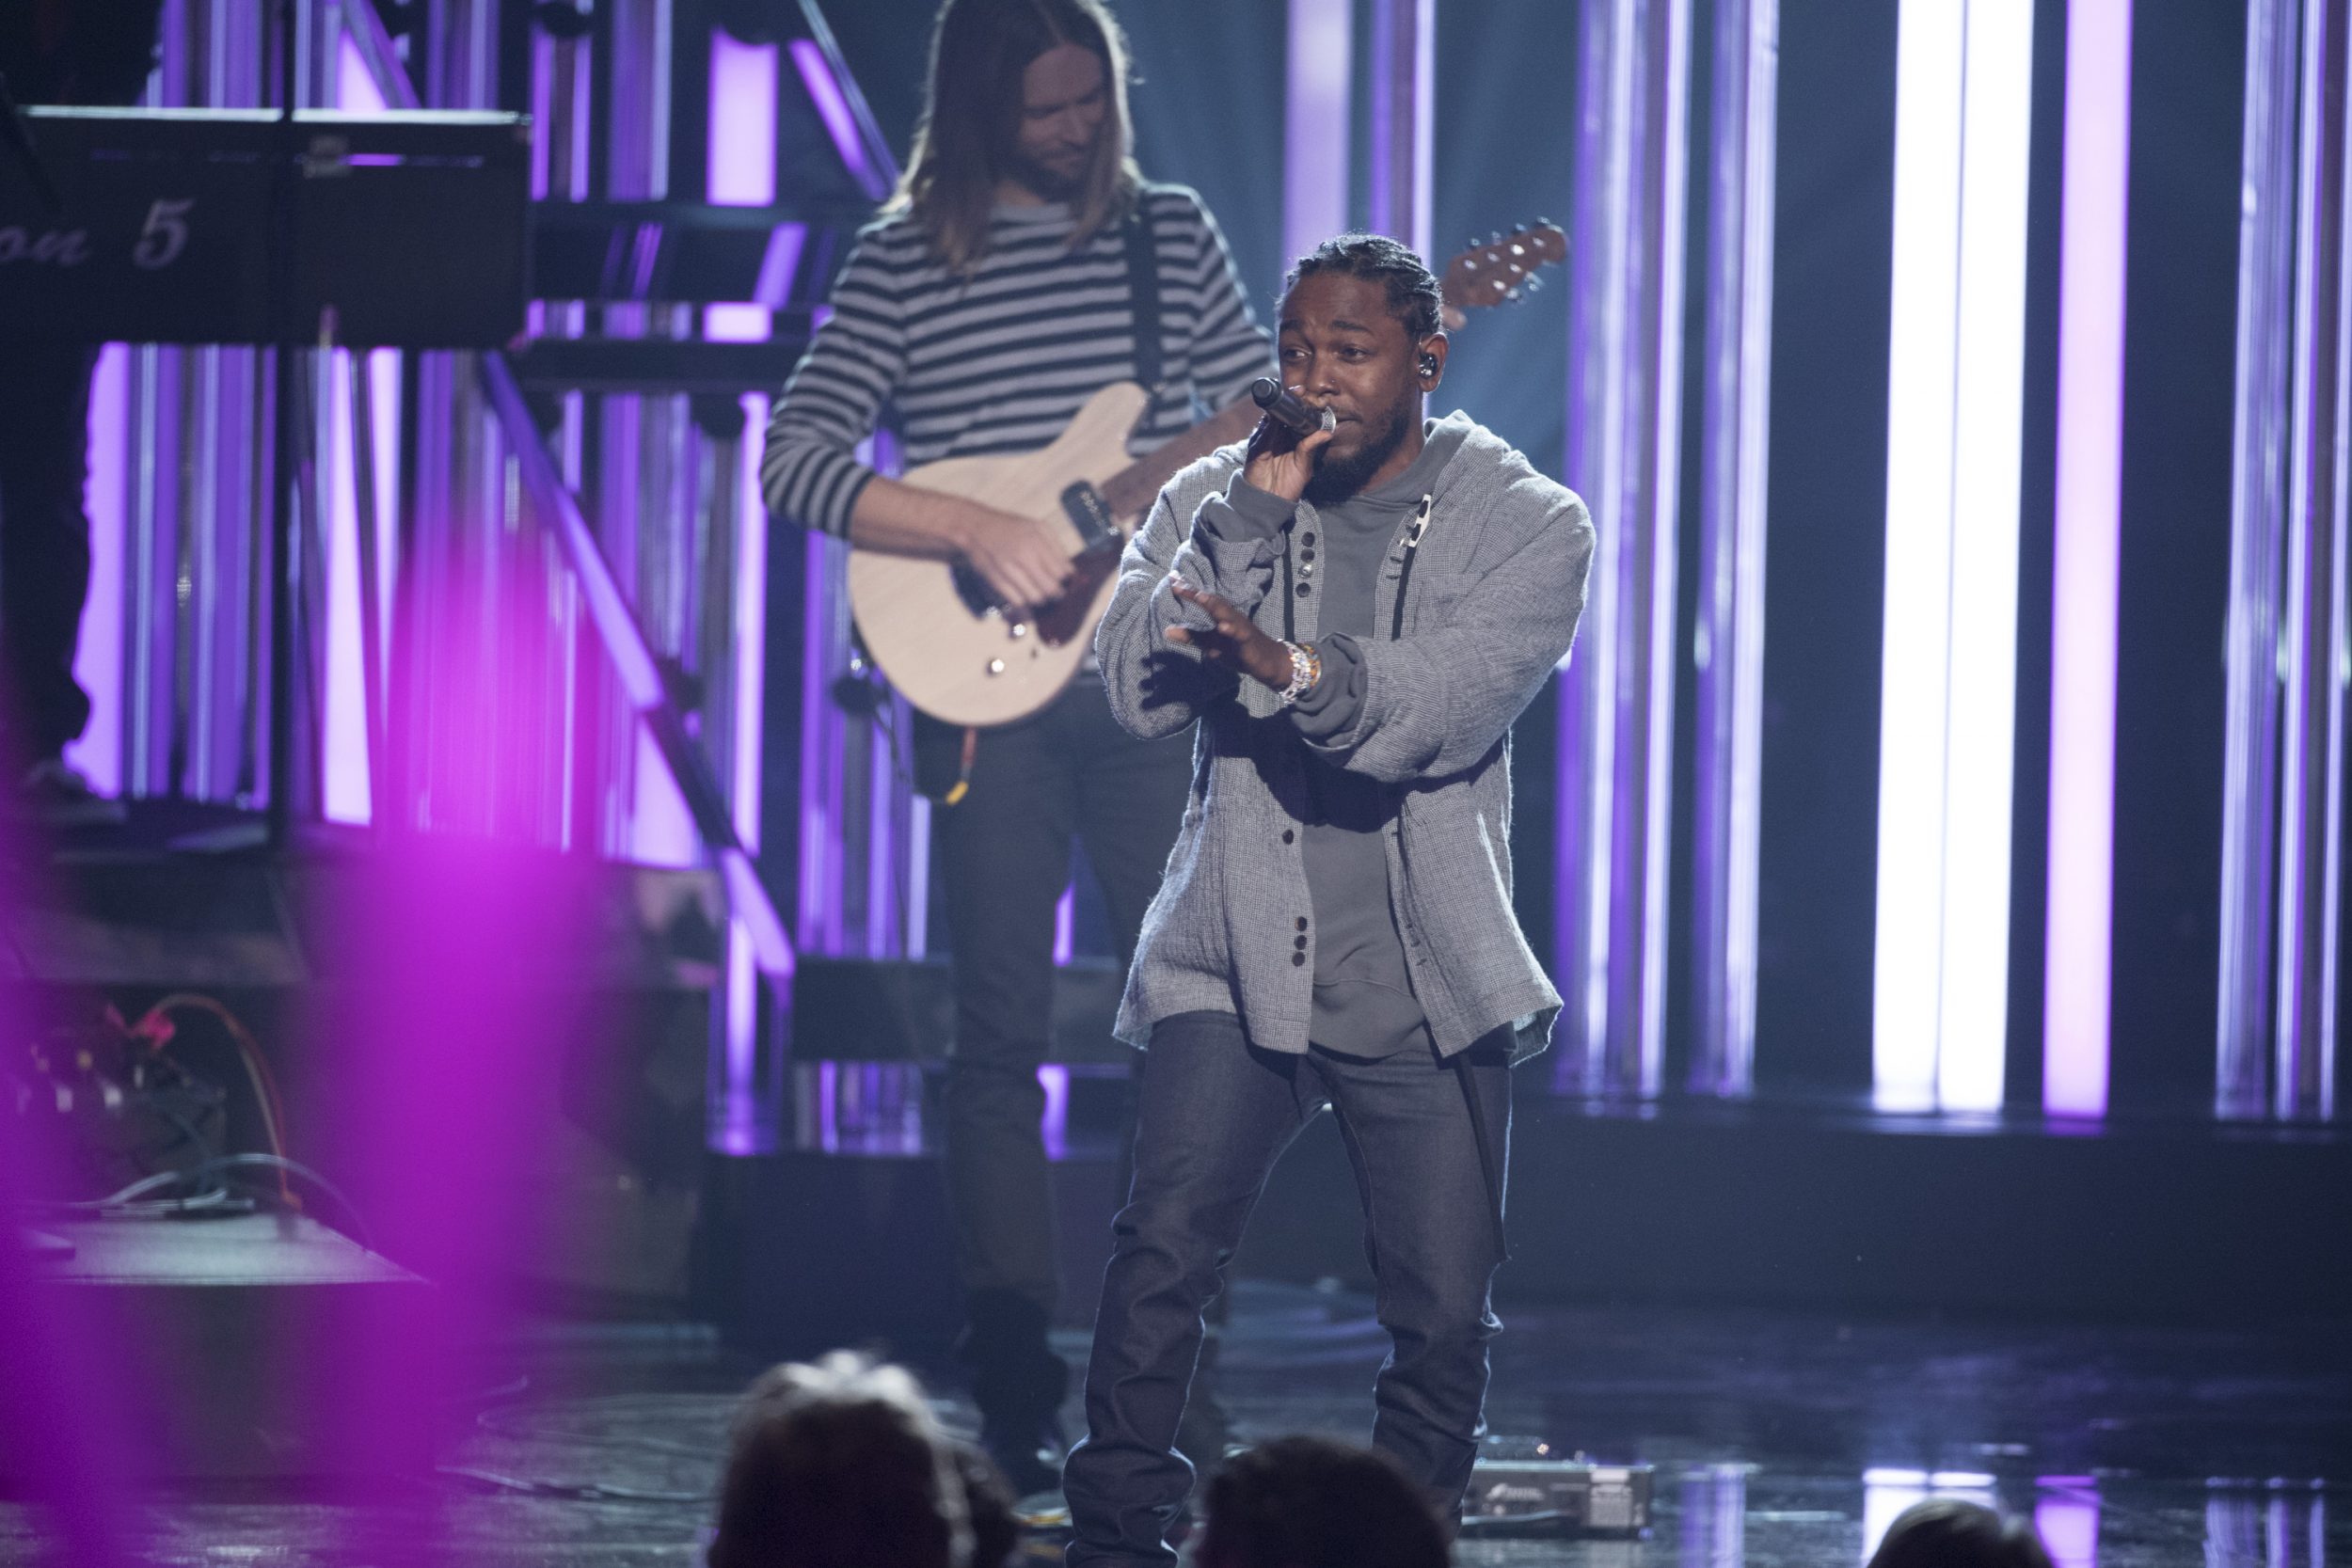 THE 2016 AMERICAN MUSIC AWARDS(r) - The “2016 American Music Awards,” the world’s biggest fan-voted award show, broadcasts live from the Microsoft Theater in Los Angeles on SUNDAY, NOVEMBER 20, at 8:00 p.m. EST, on ABC. (Image Group LA/ABC) KENDRICK LAMAR